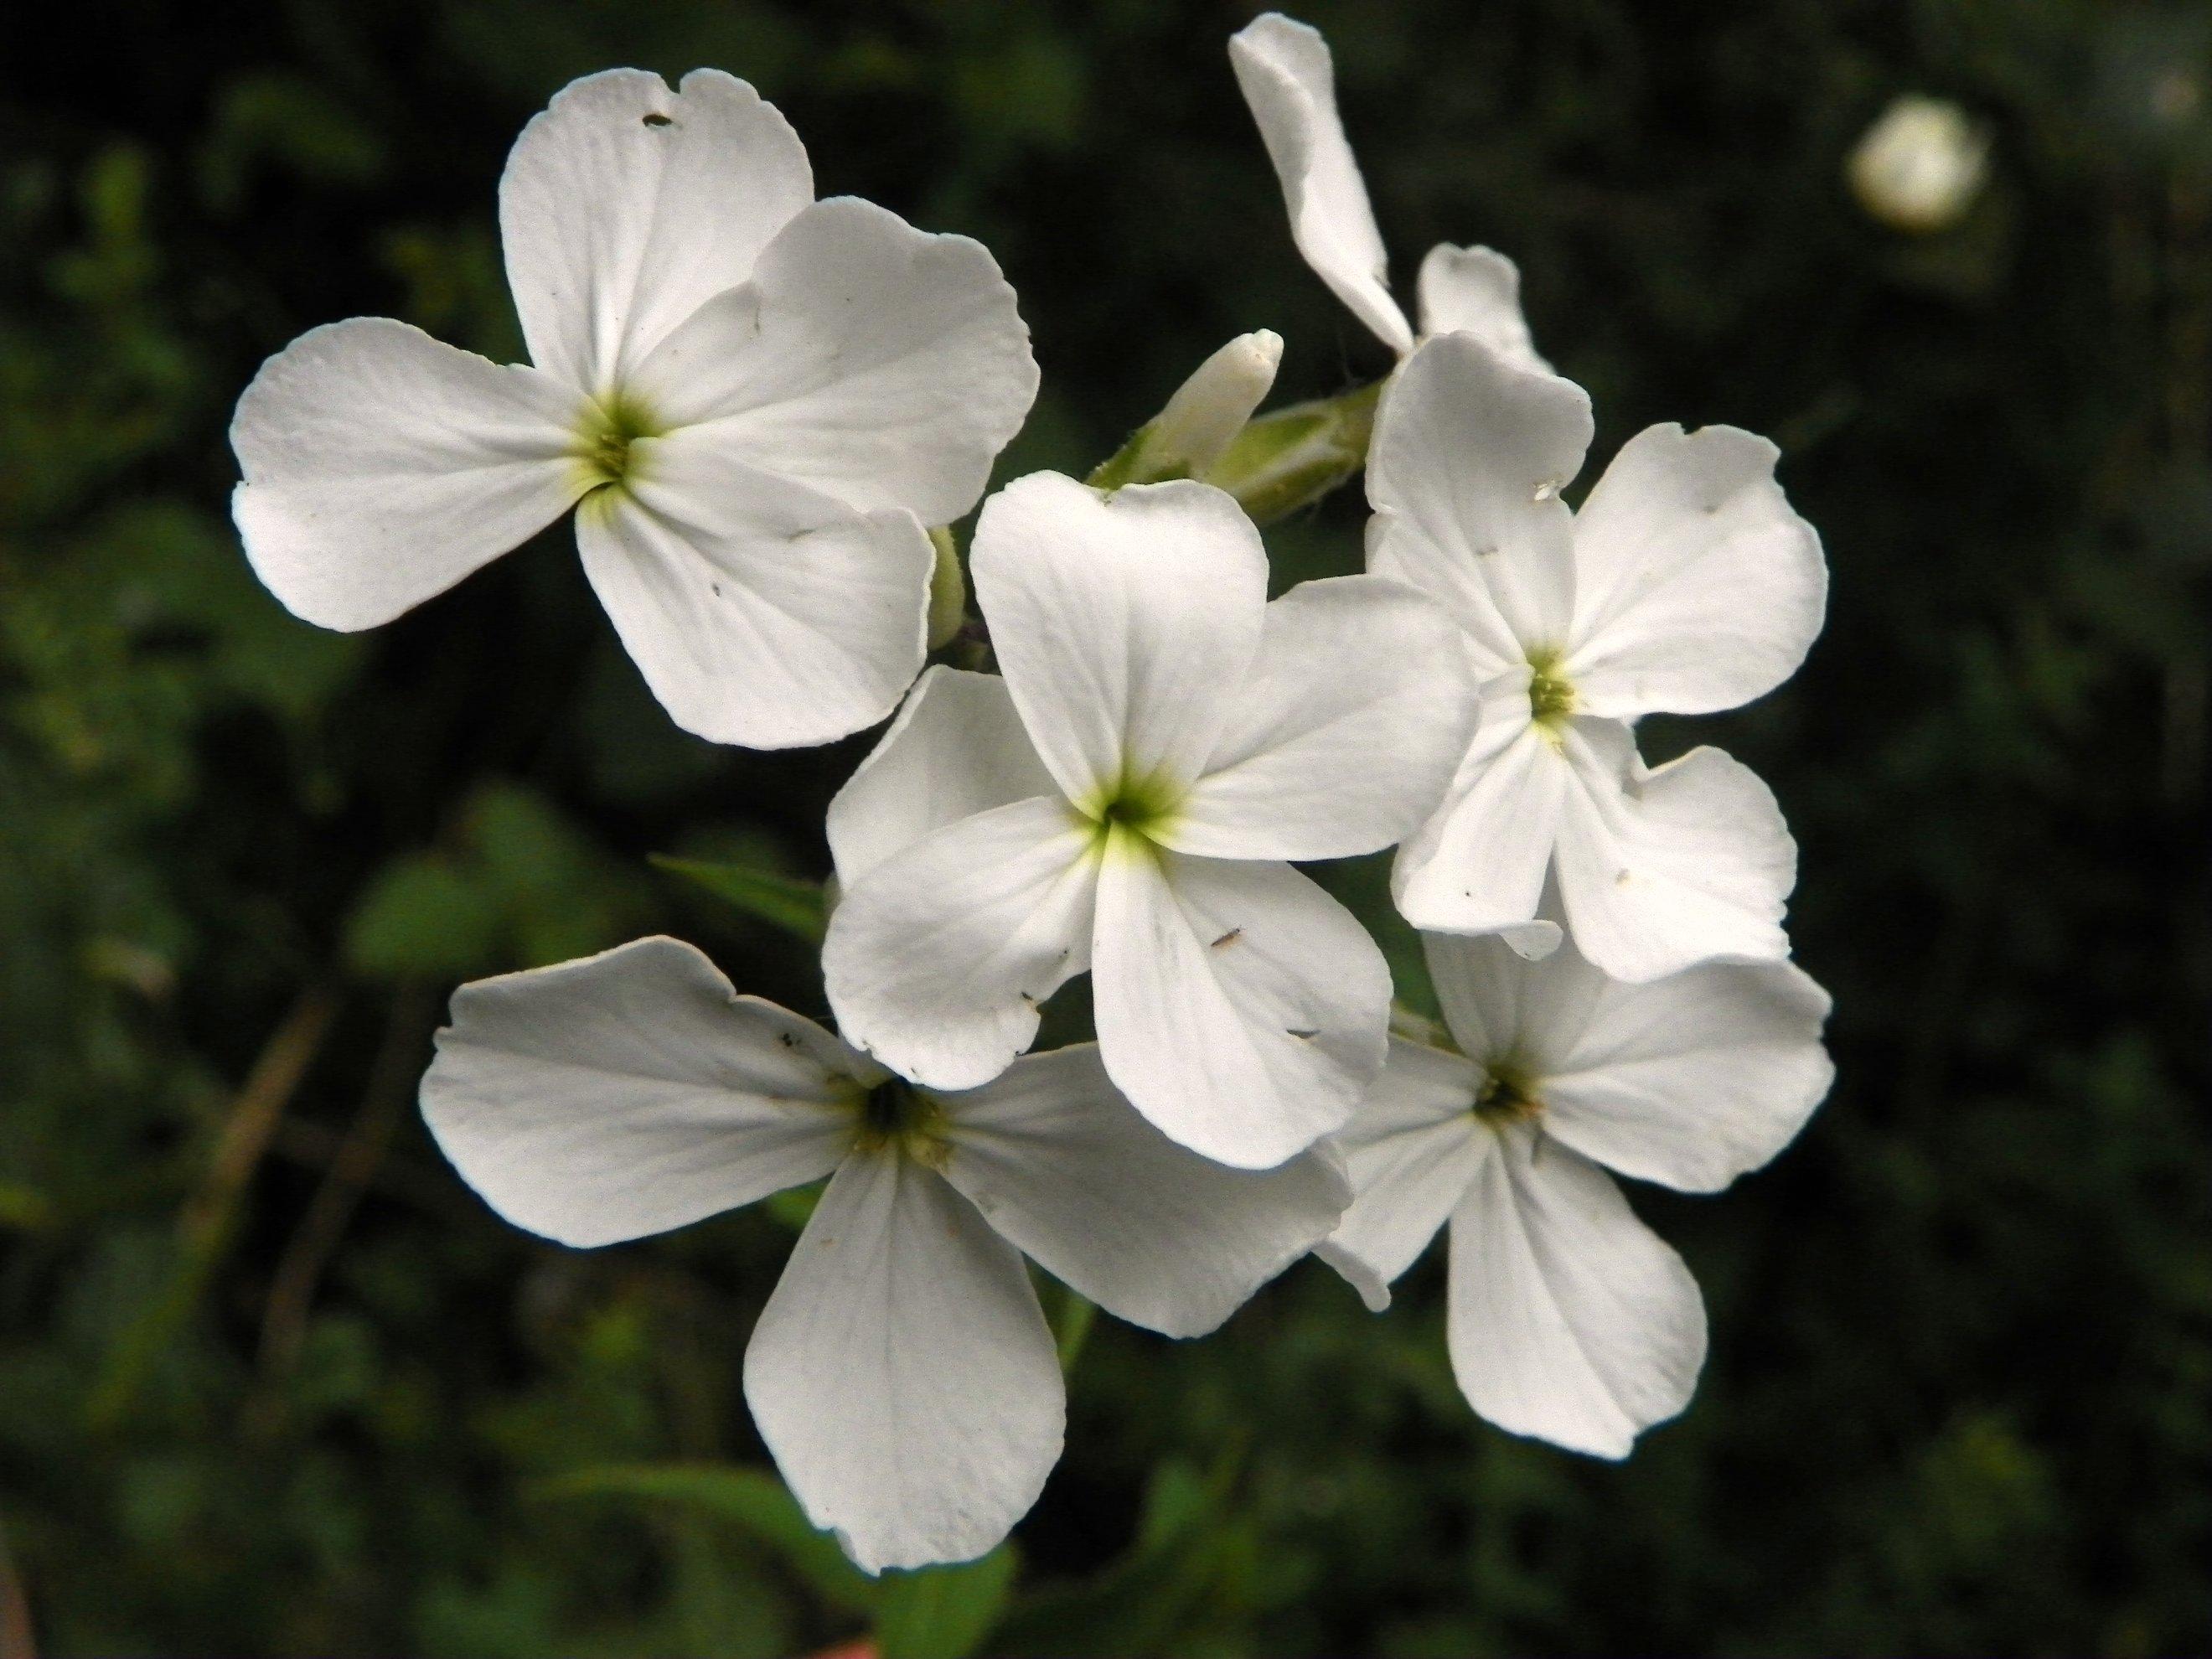 white flowers with green-yellow center, white buds, green stems, and leaves